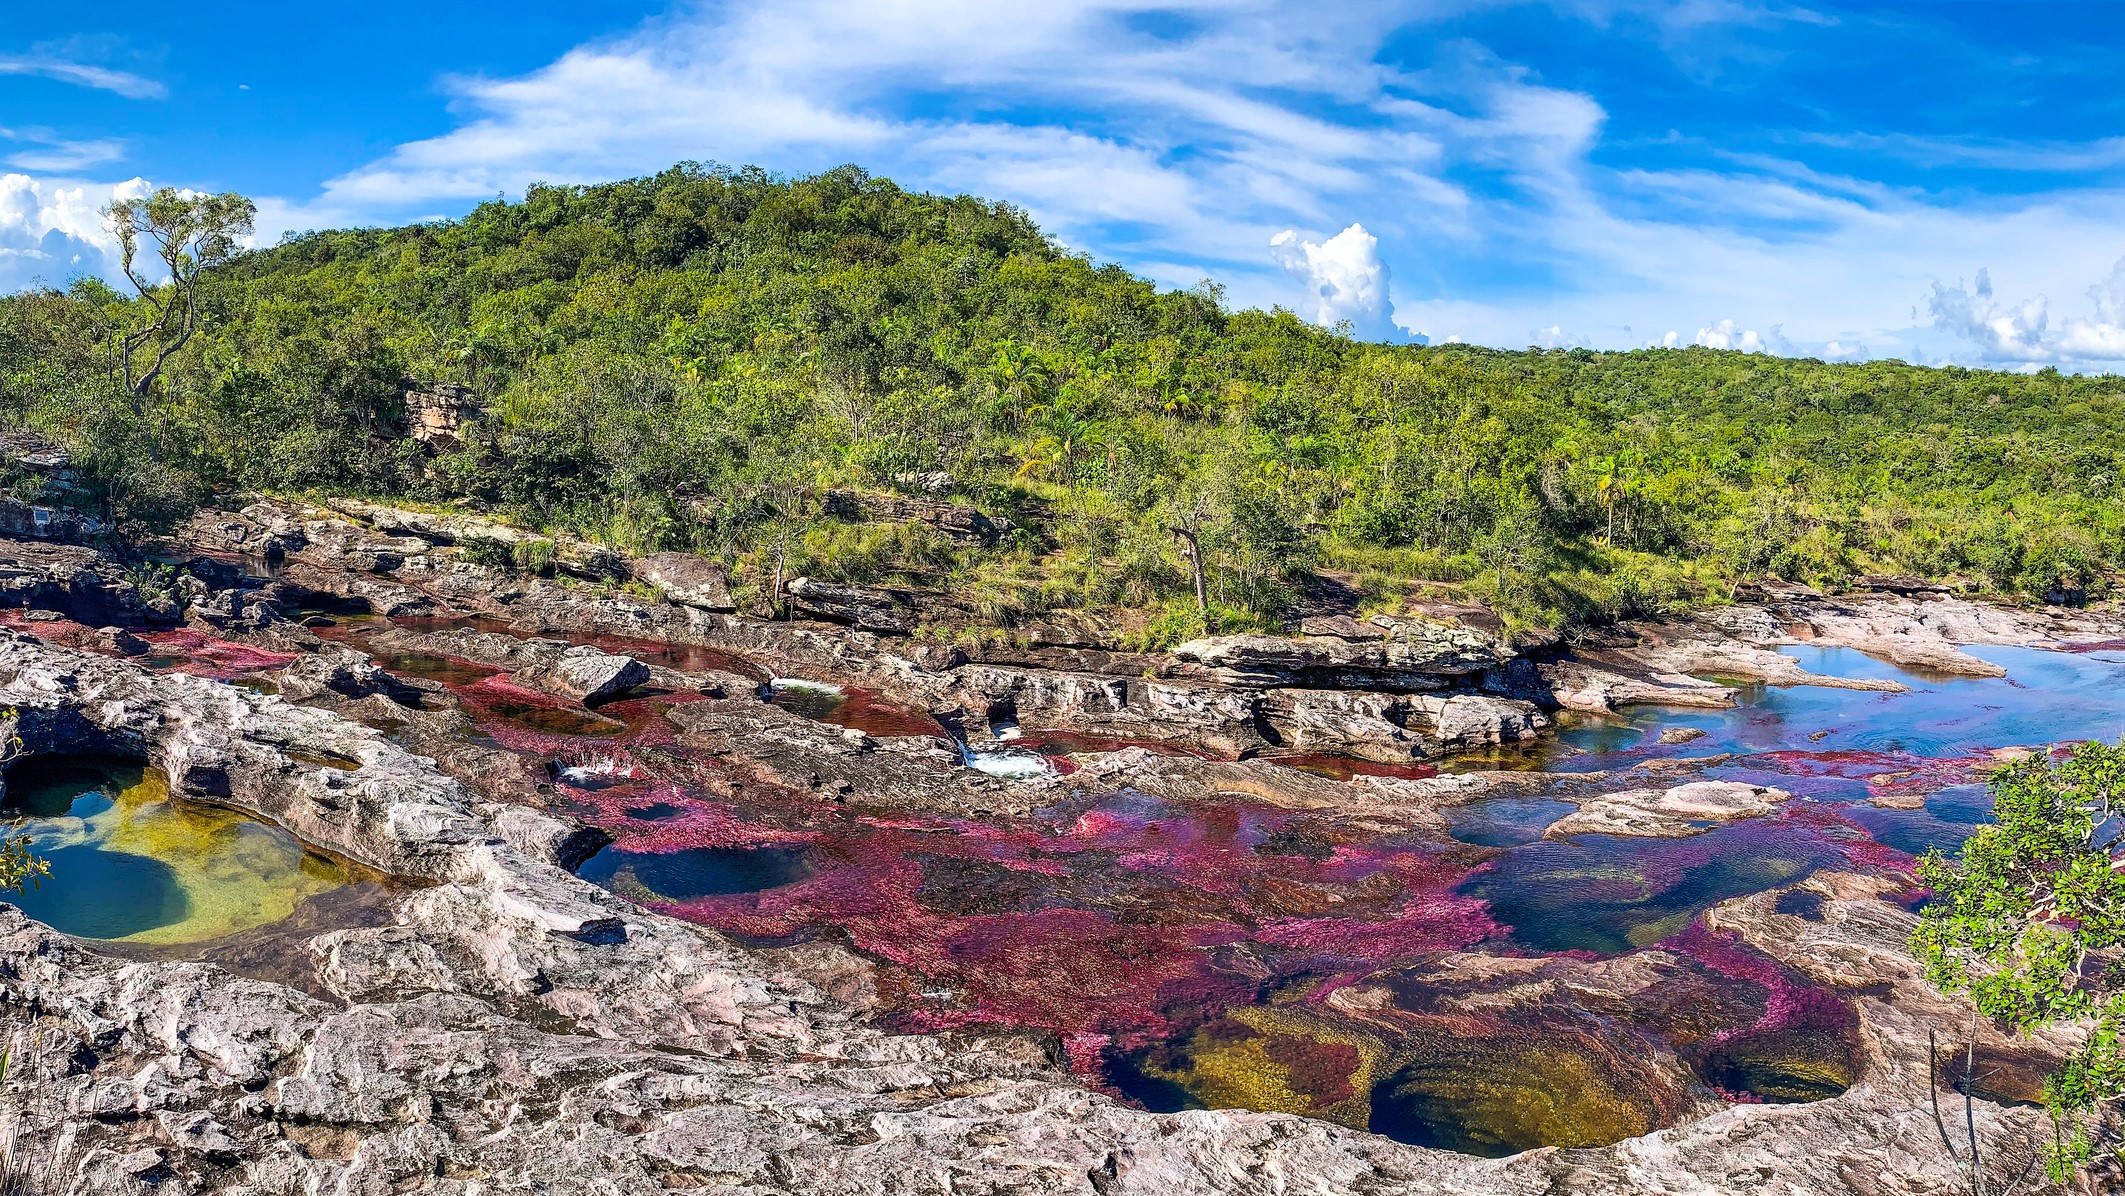 Located in the Serrania de la Macarena, Caño Cristales is noted for its striking colors, thanks to the macarenia clavigera plant for its bright red hues. In addition, the Caño Cristales is a river with a relatively fast current along many parts with many rapids, waterfalls and several circular pits or holes